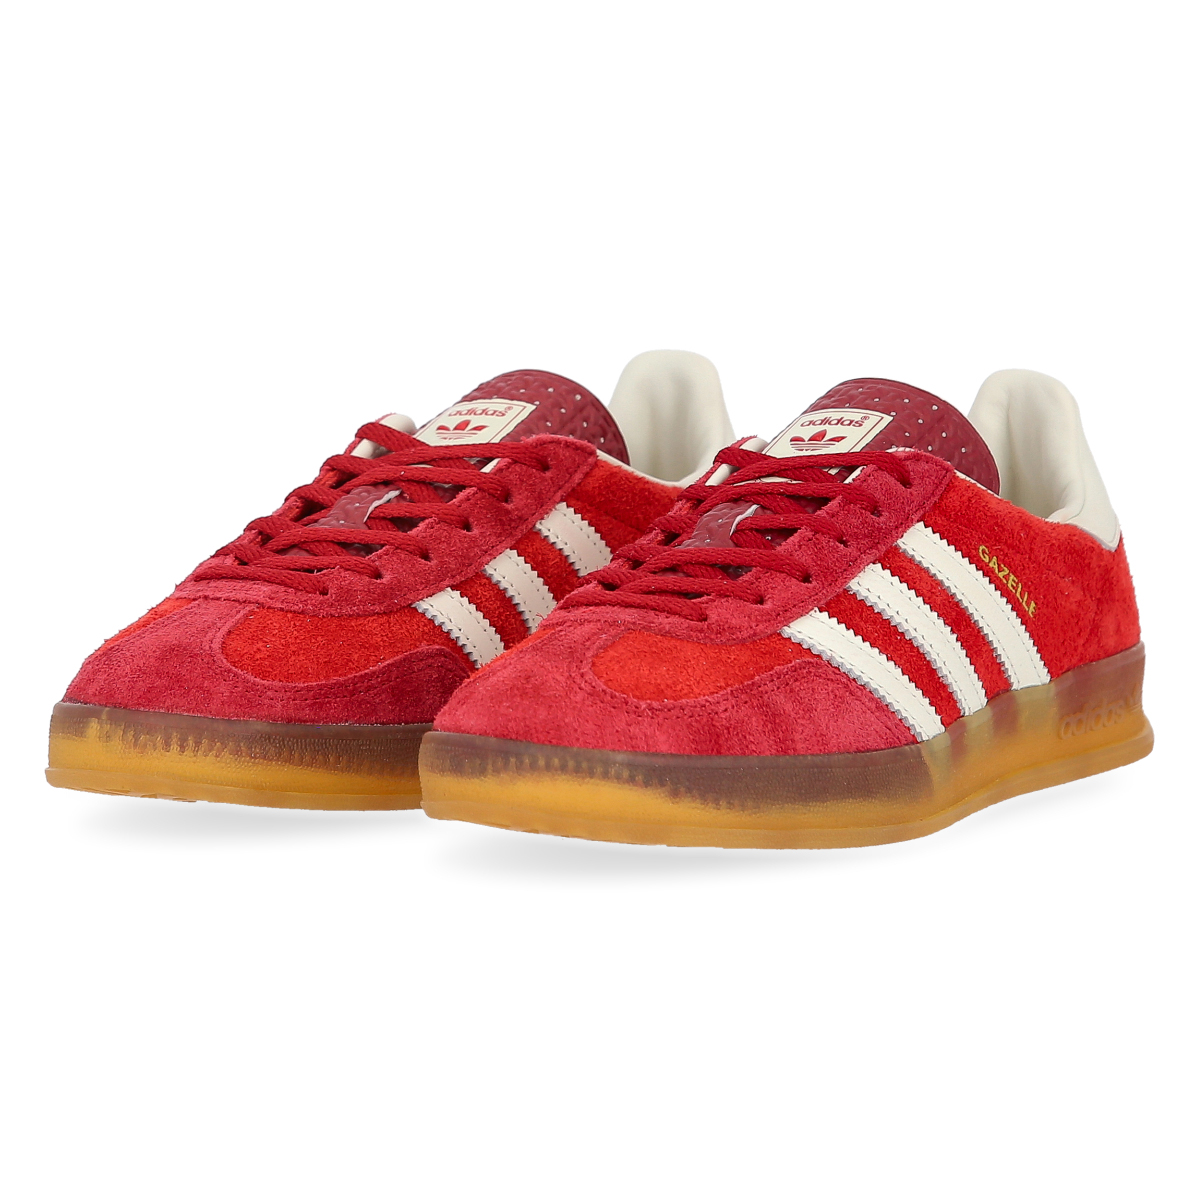 Zapatillas adidas Gazelle Mujer,  image number null